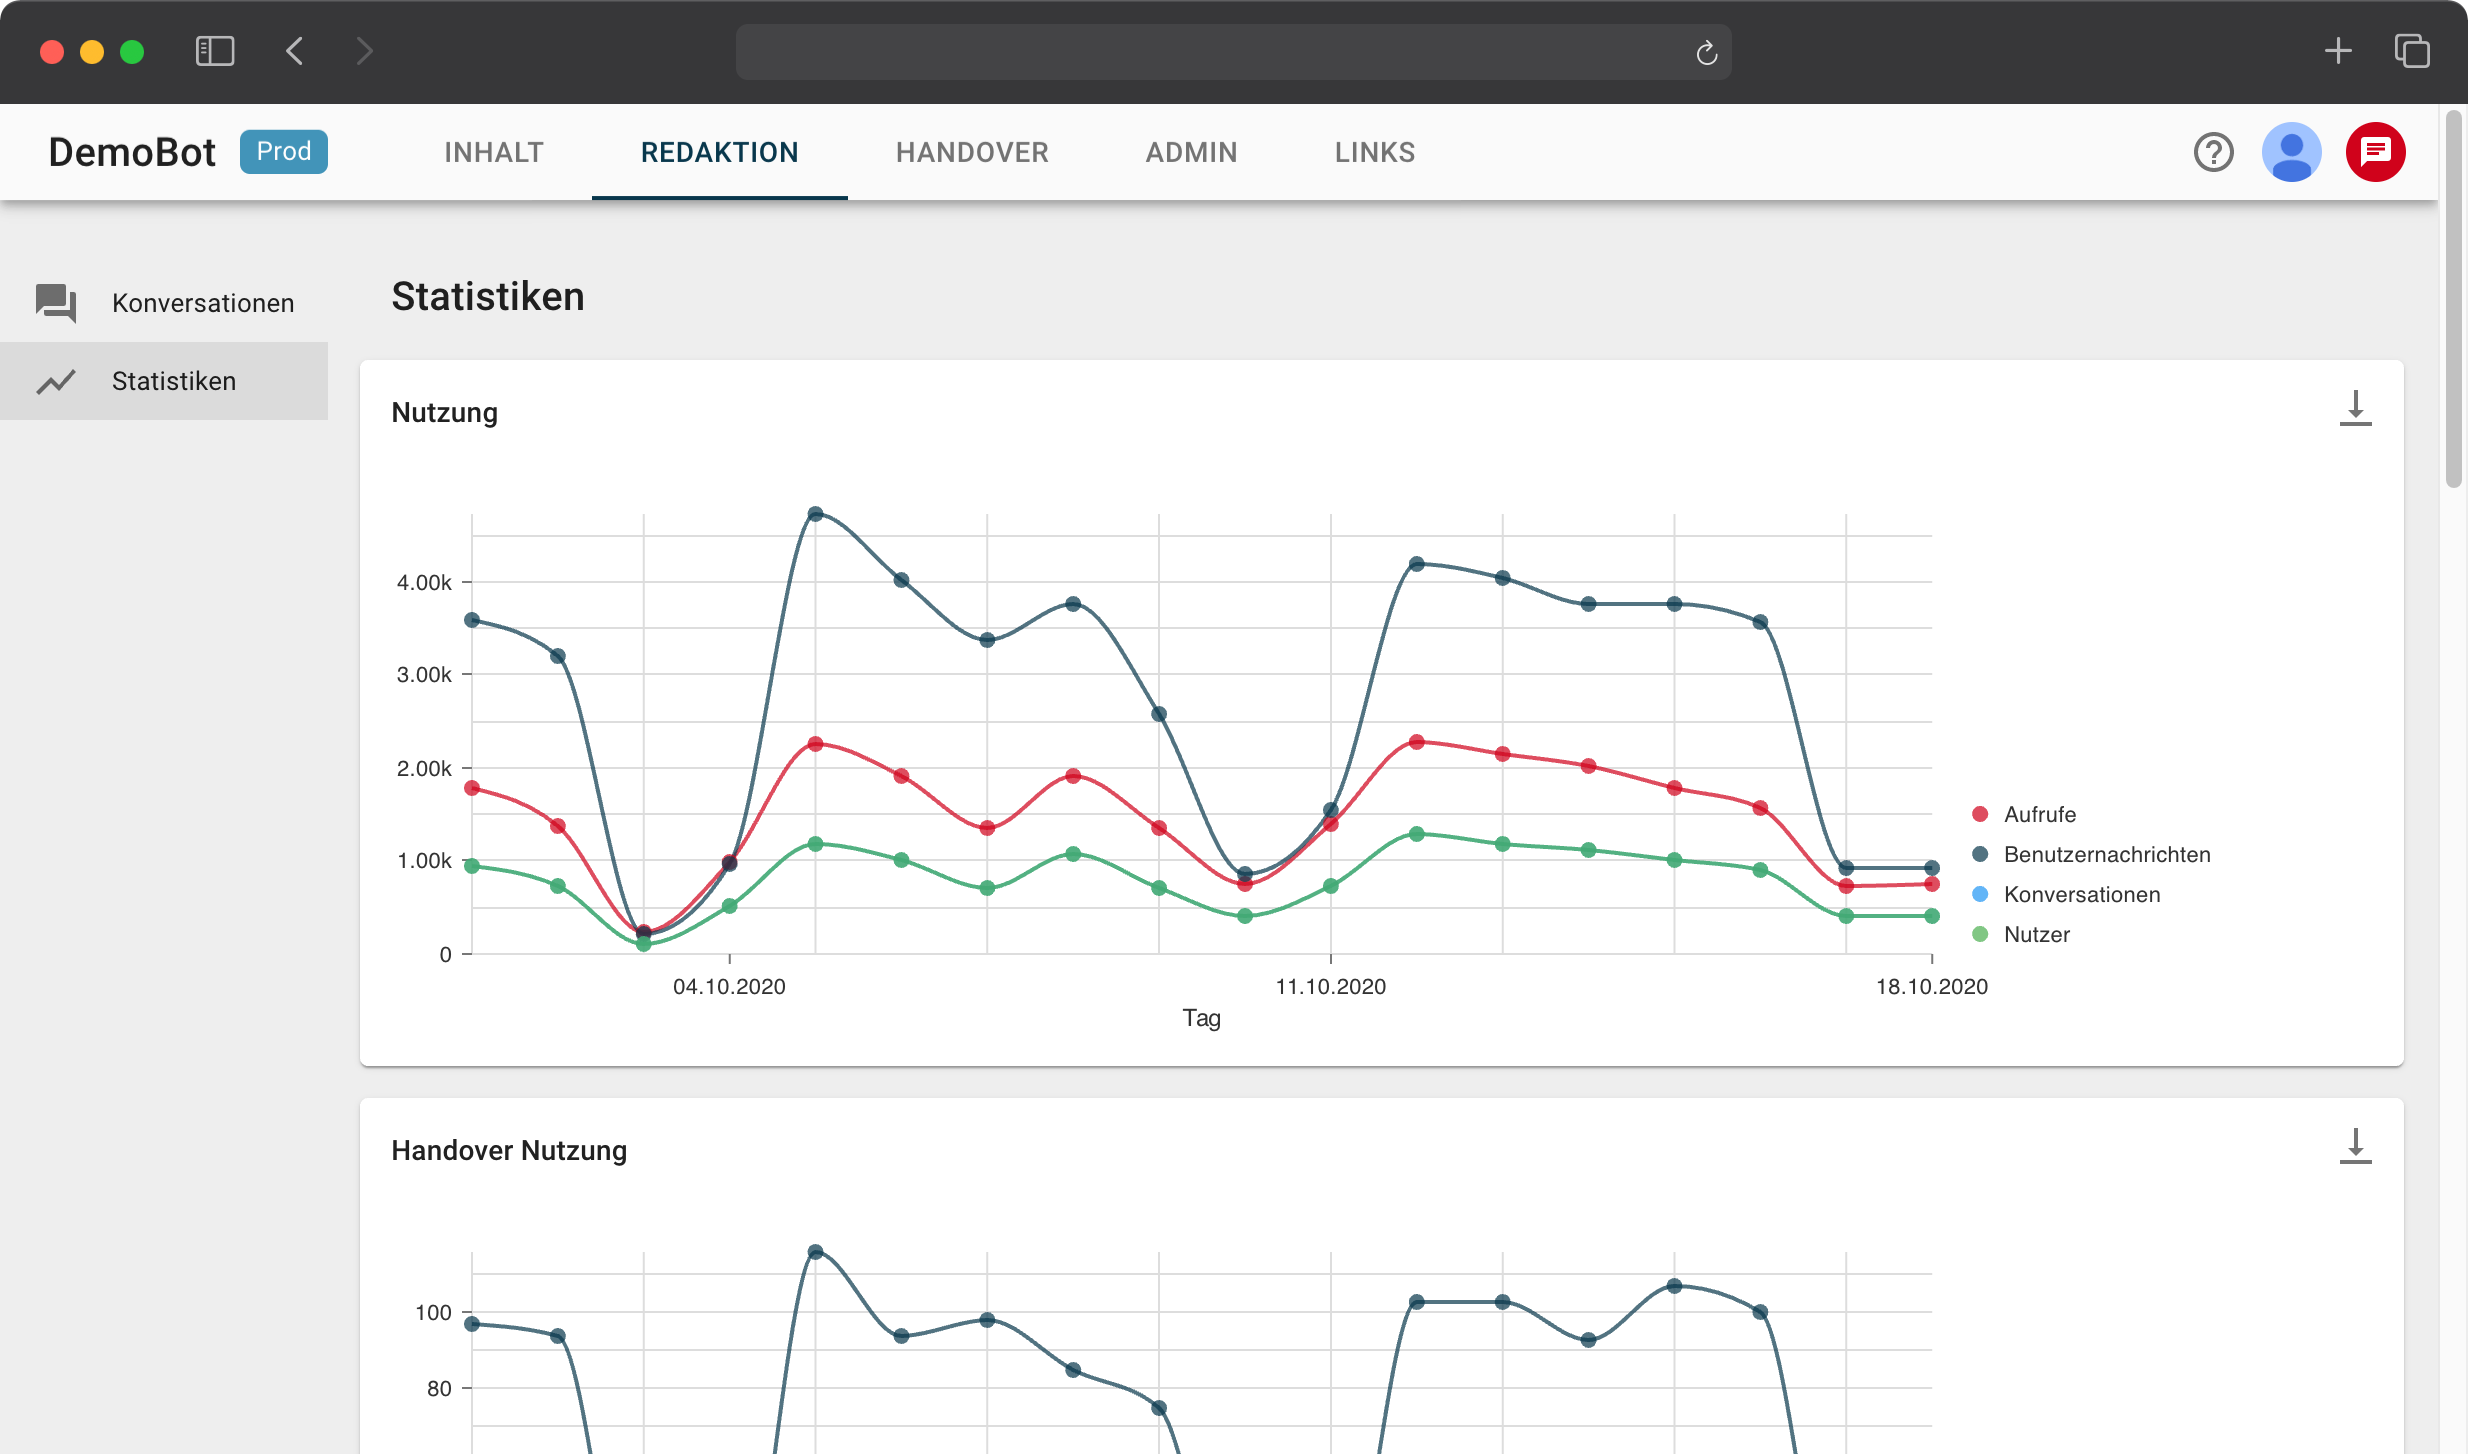 Analytics for key KPIs and content development